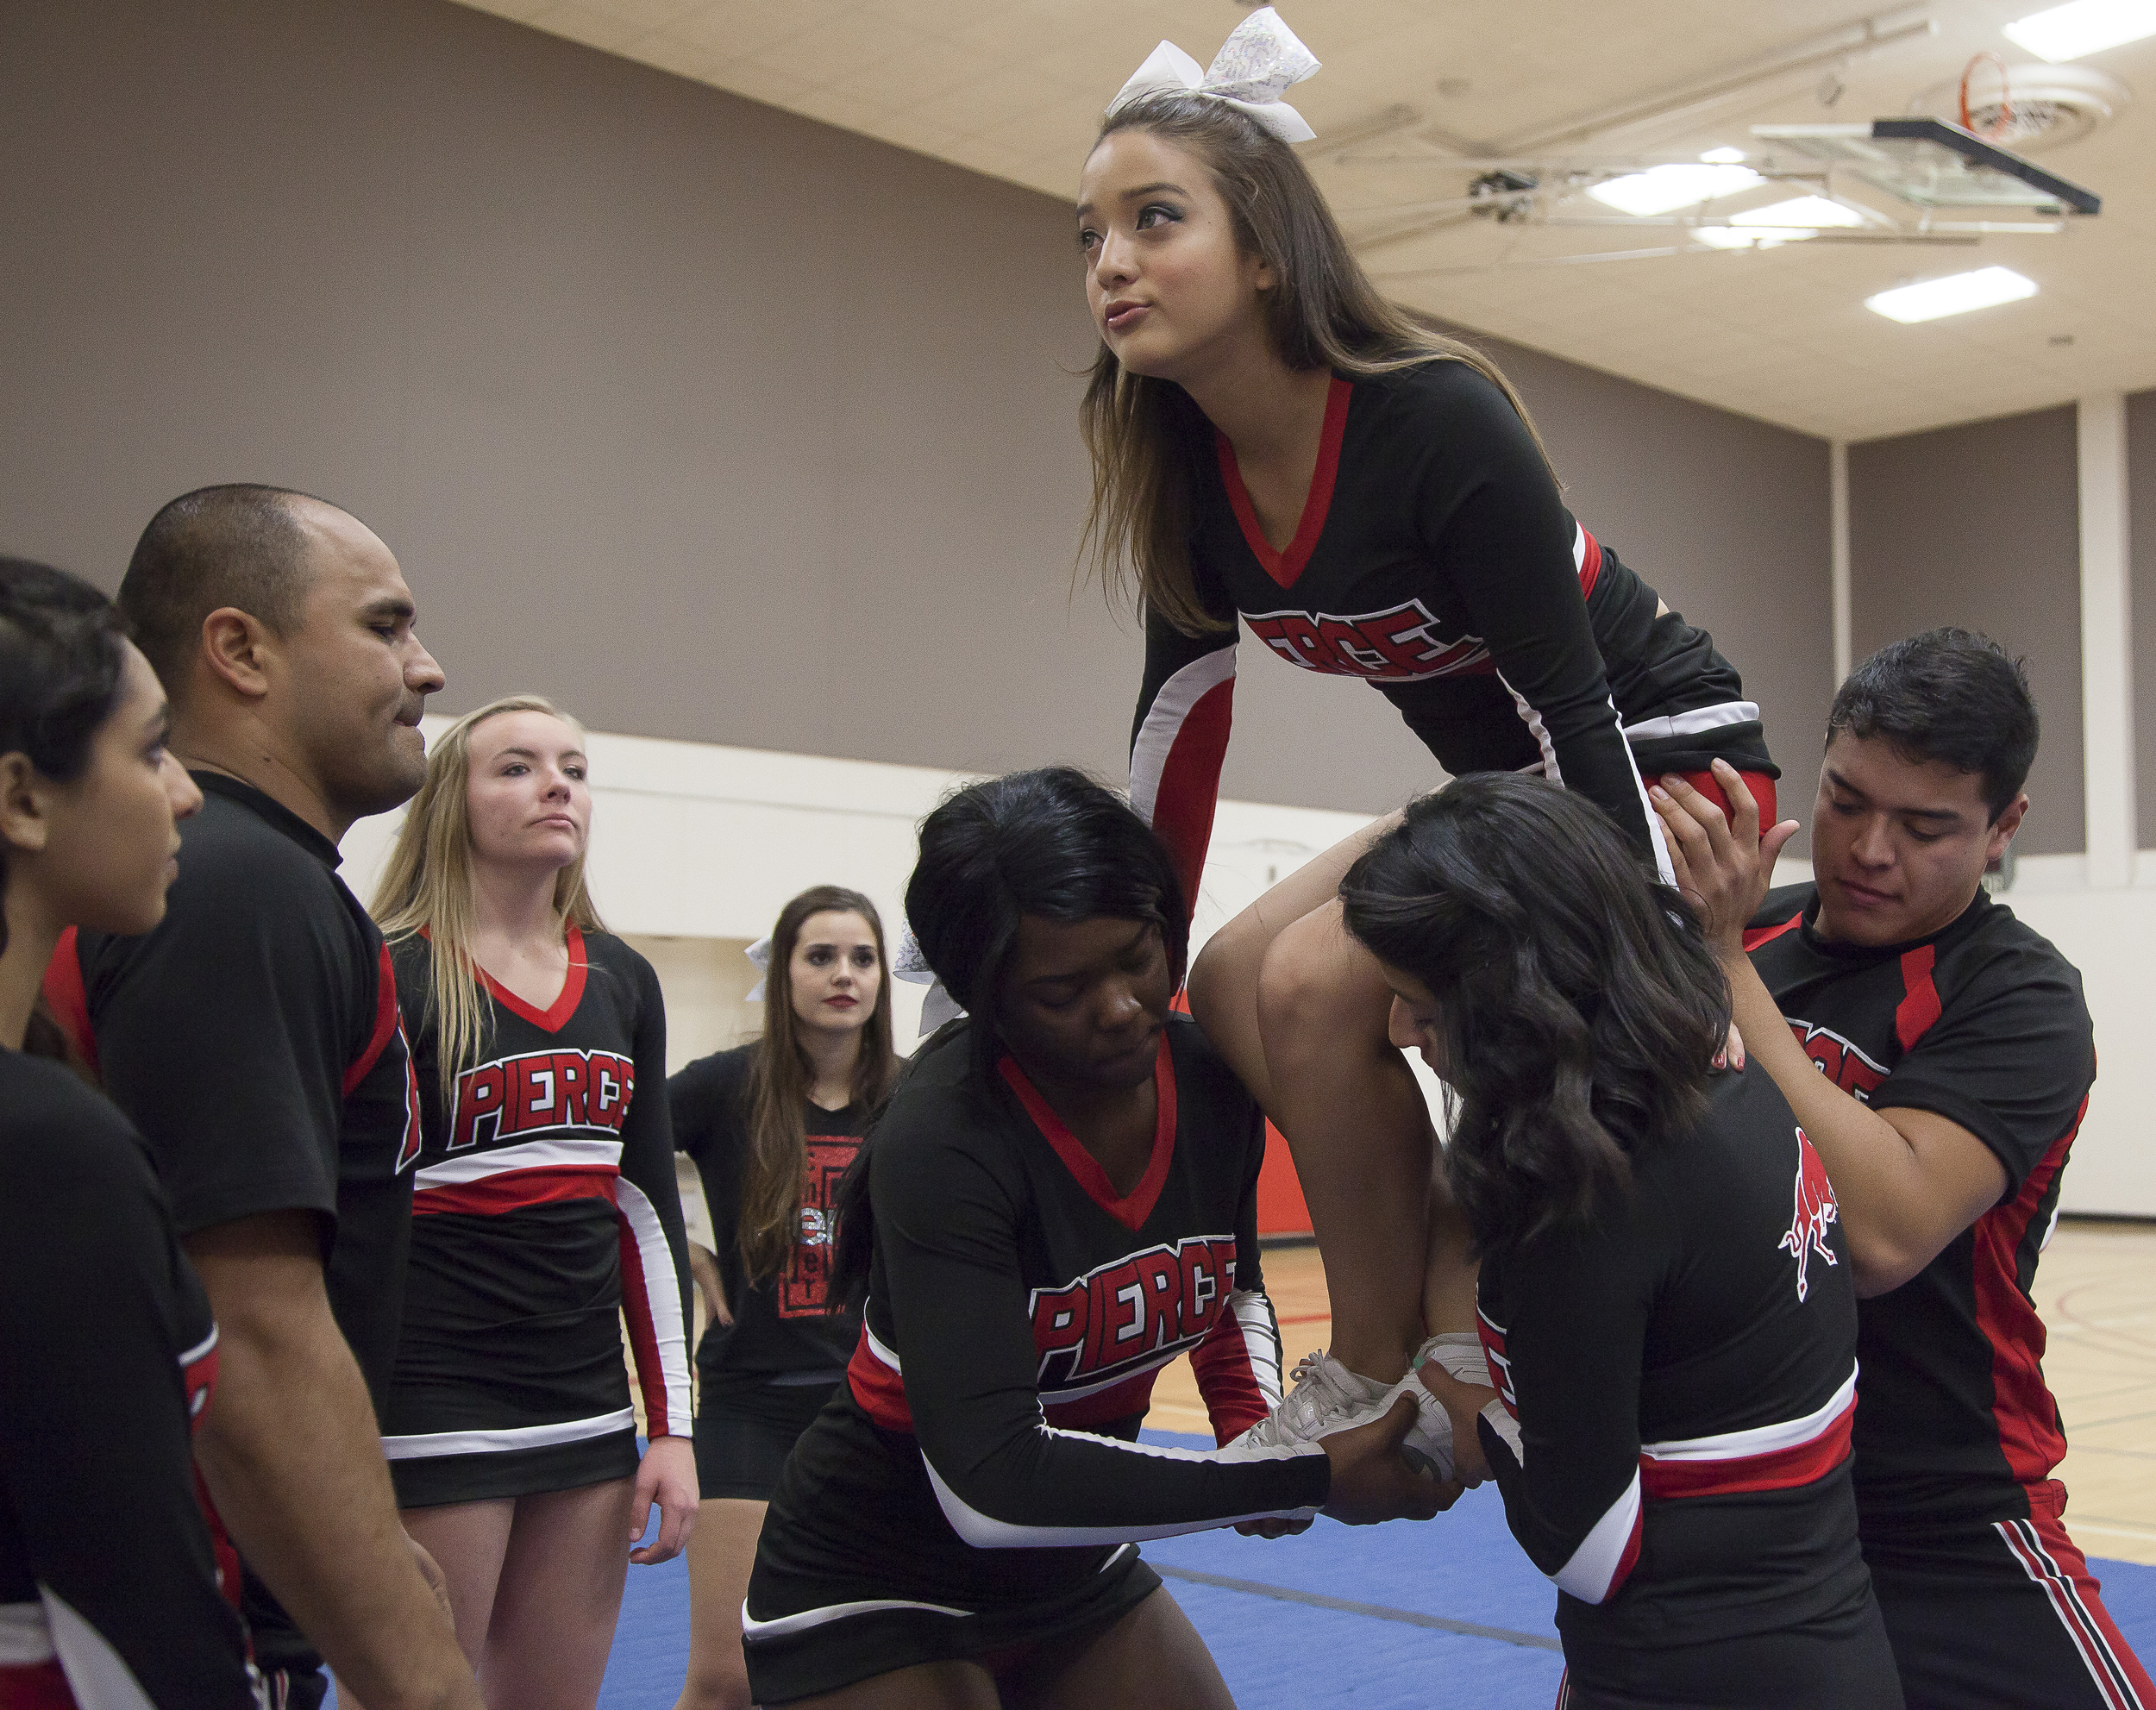  Vivian Herrera prepares to be lifted by Karlanda Duquesnay, Dulce Rendon and Jesus Guzman in a maneuver called a "full up", as other team members watch during a pracitice session in the North Gym on Sunday March 1, 2015. Woodland Hills, Calif.  Read